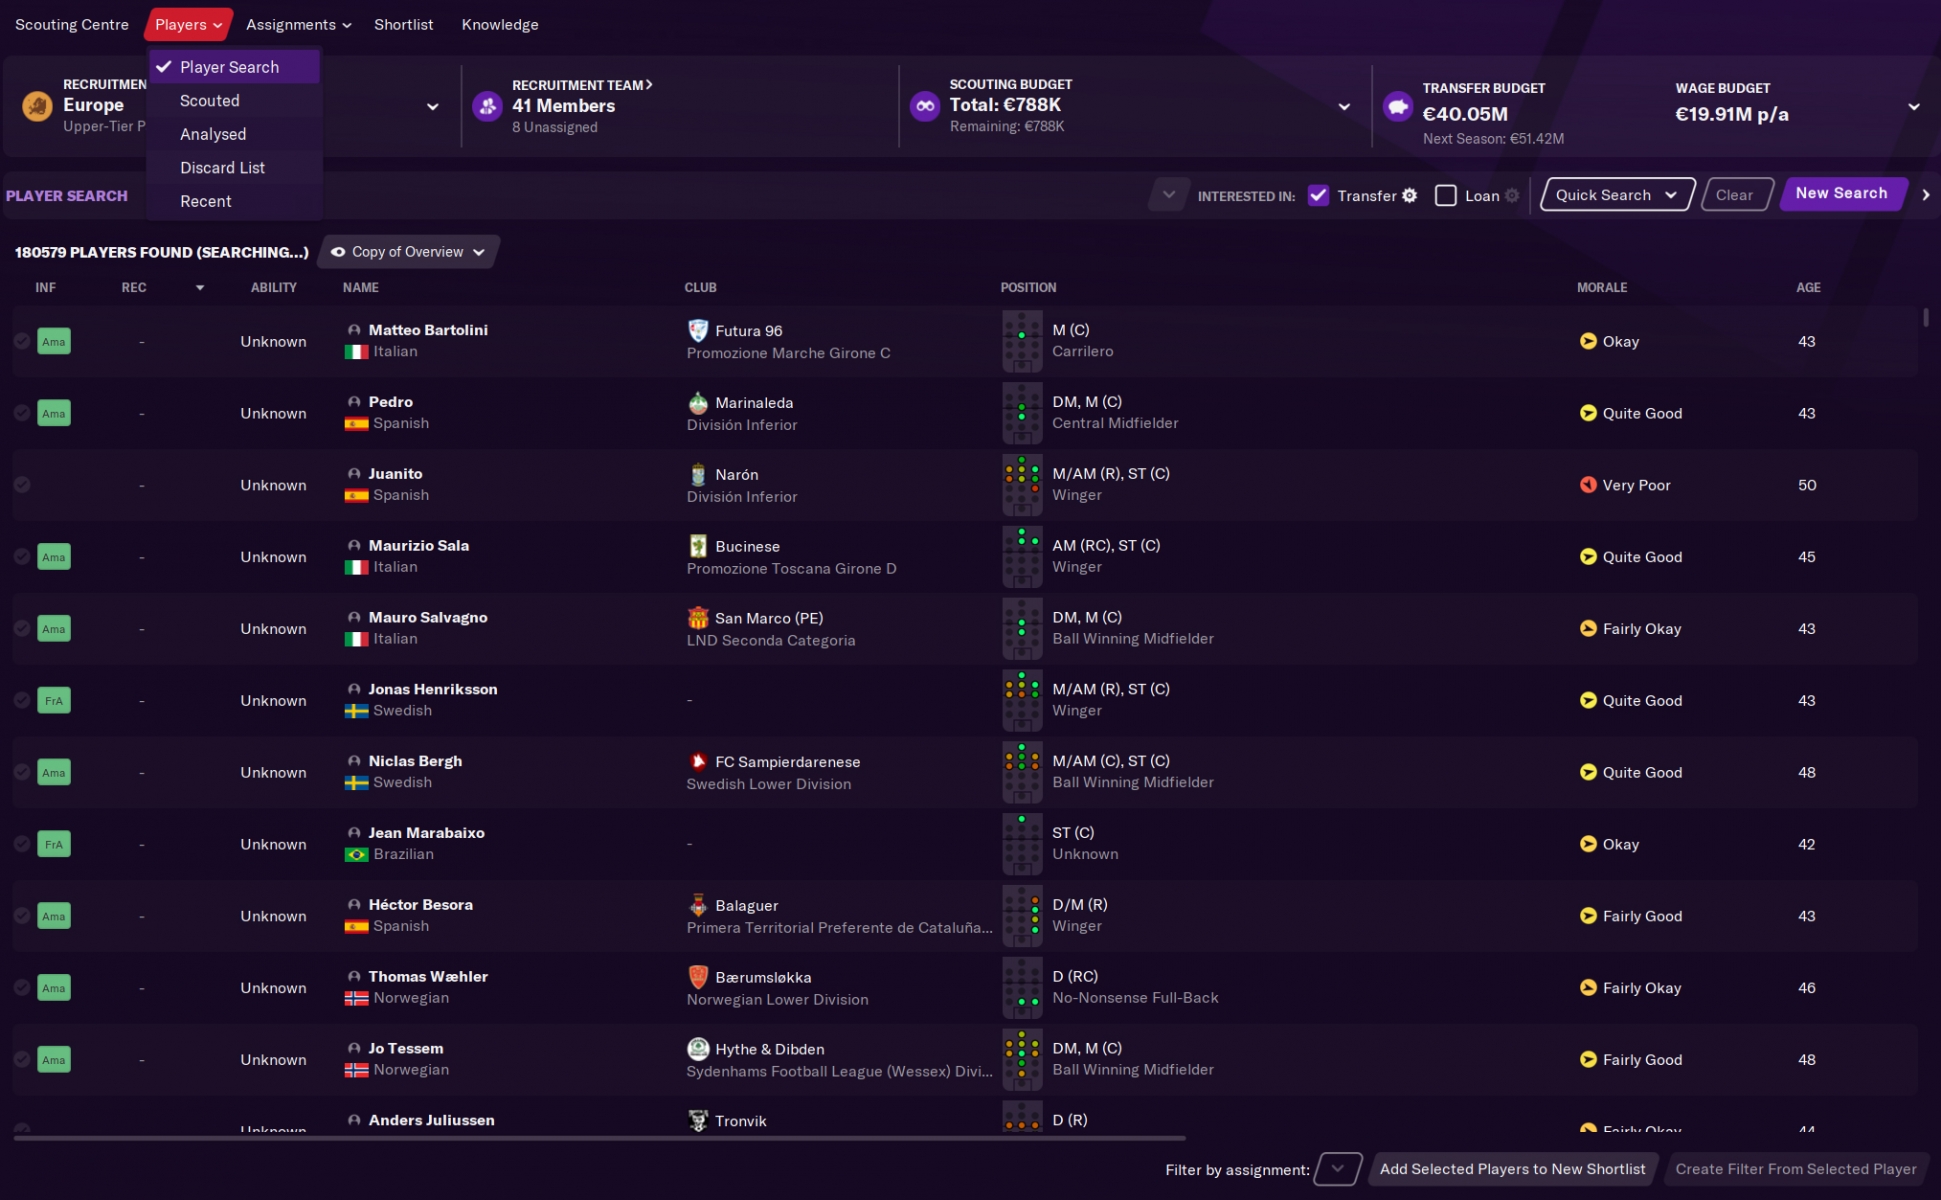 Football Manager 2022: Best Wonderkids You Can Buy For Cheap